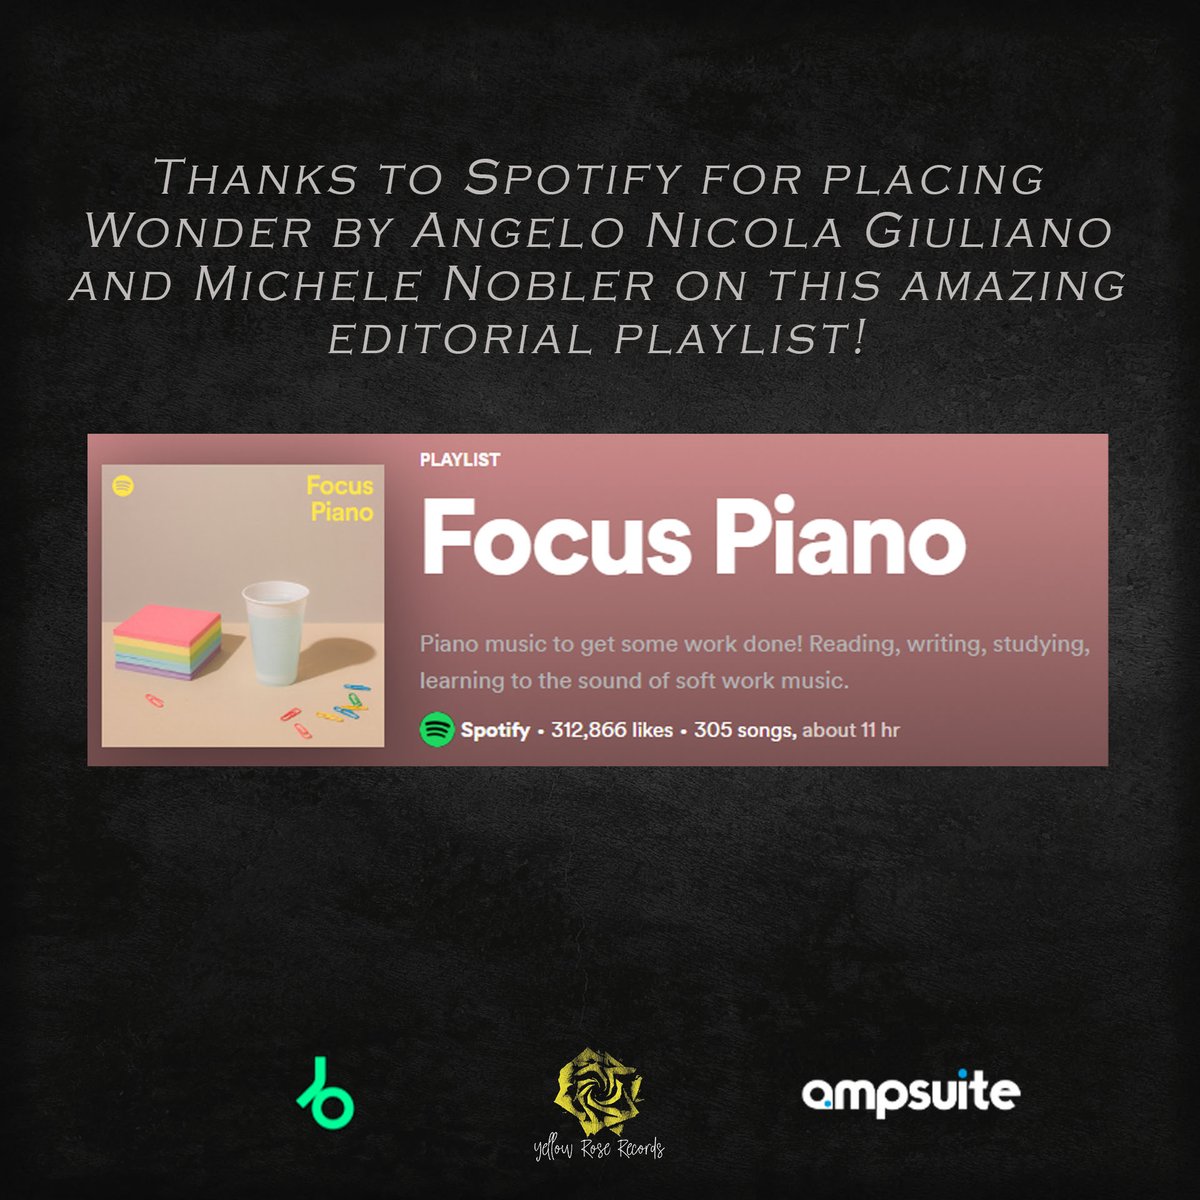 Thanks to Spotify for placing Wonder by Angelo Nicola Giuliano and Michele Nobler on this amazing editorial playlist! Check it out here: open.spotify.com/playlist/37i9d… Powered by @AMPsuite and @beatport Supported by @ValleyVRecords